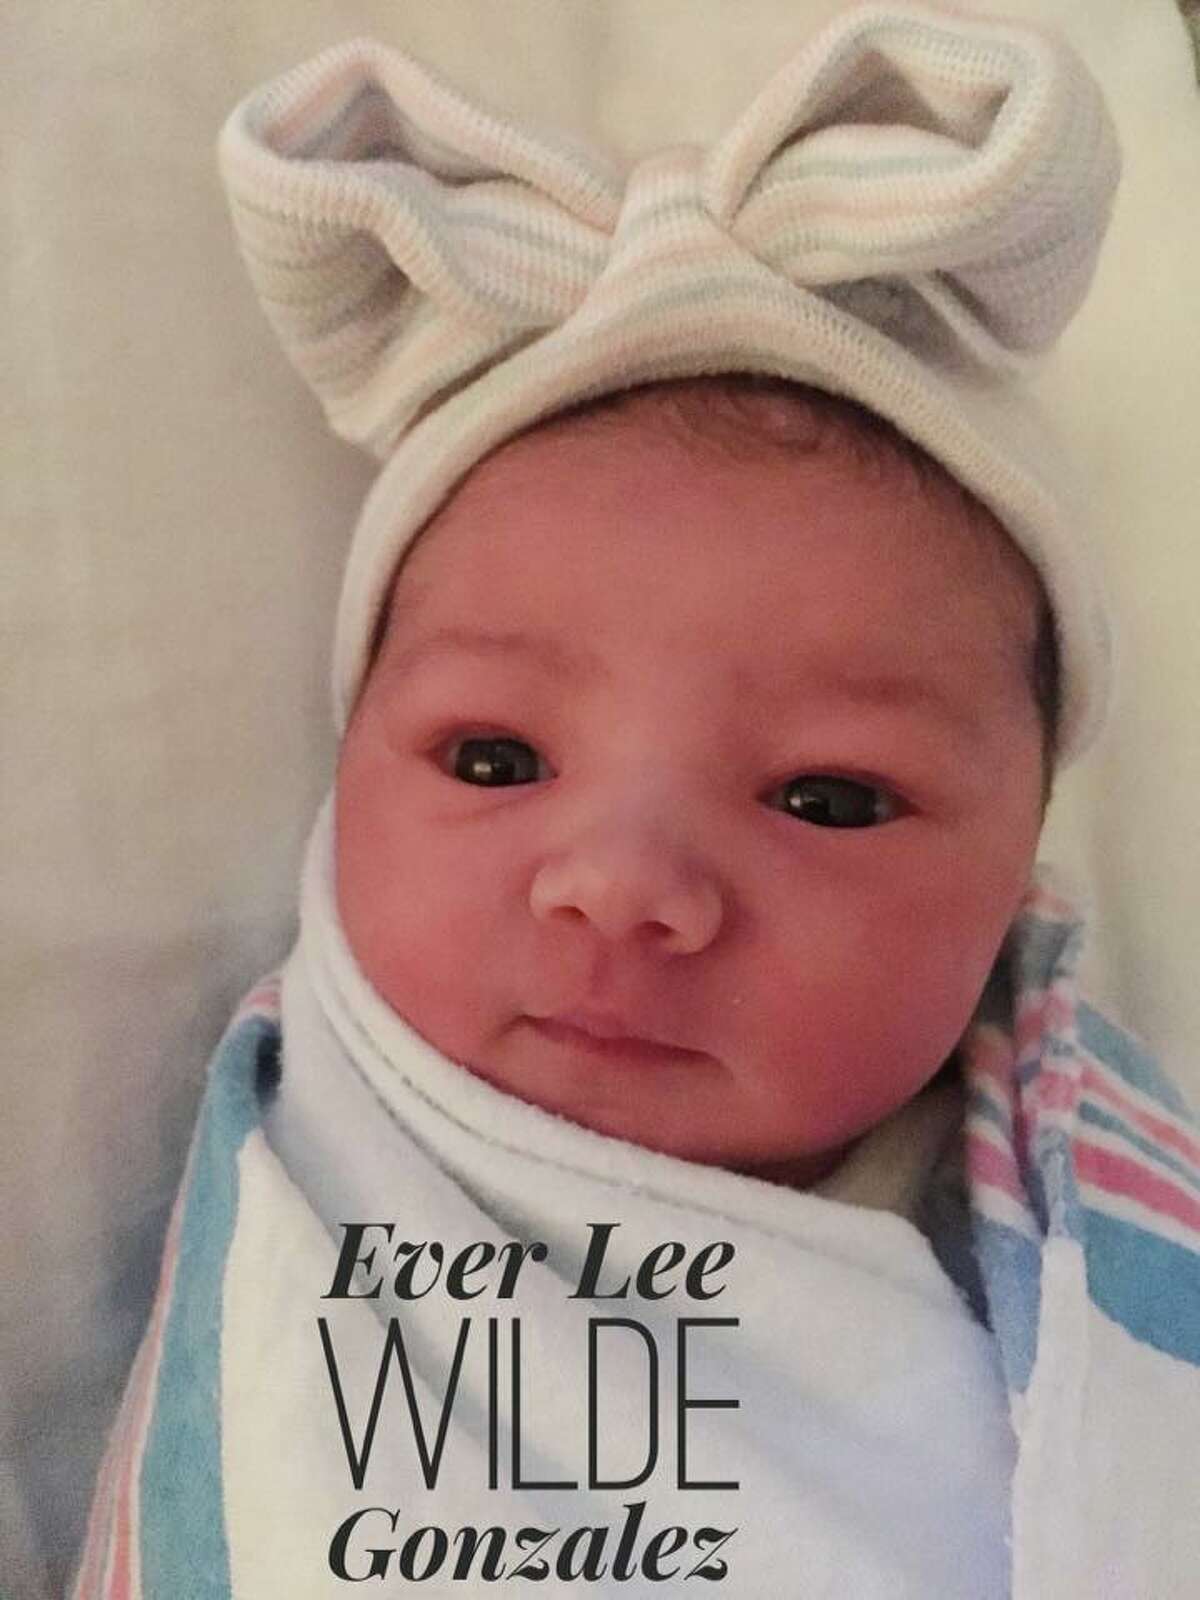 Nicholas Gonzalez and his wife, Kelsey Crane, welcomed a new baby girl on March 1: a daughter named Ever Lee Wilde Gonzalez.